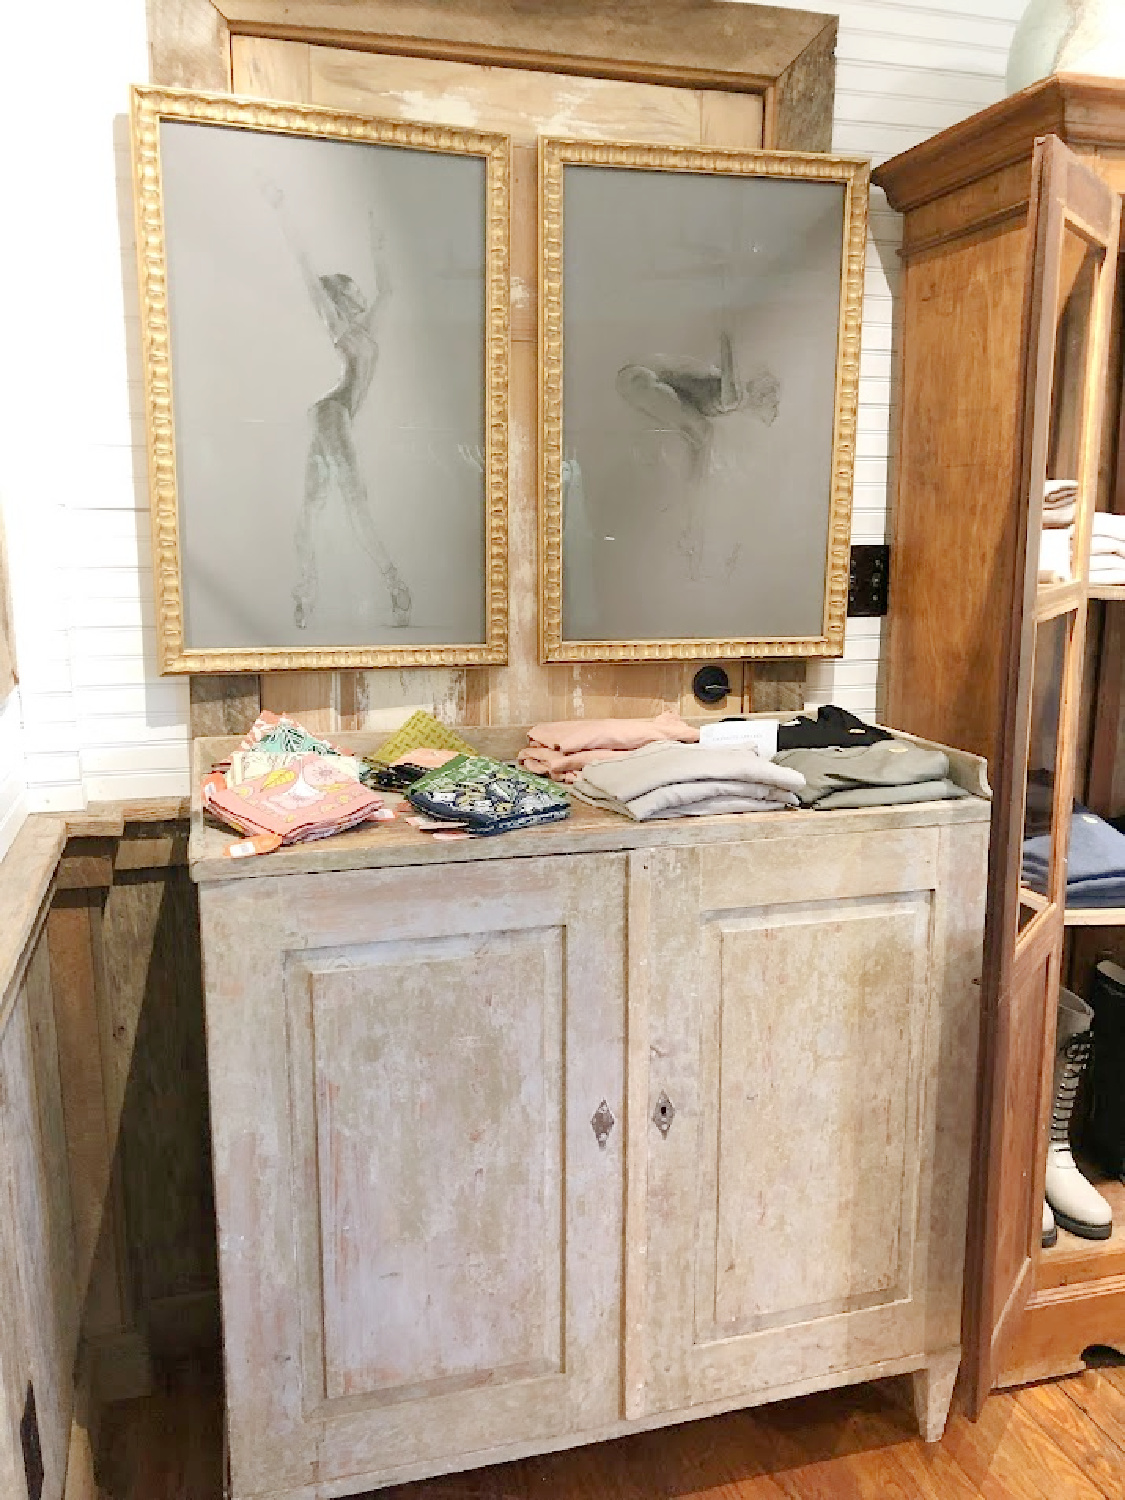 Swedish antique cupboard and ballerina sketches at shop near Franklin - Patina Home & Garden shop from Giannettis in Leiper's Fork, TN - Hello Lovely Studio. #patinahome #leipersforktn